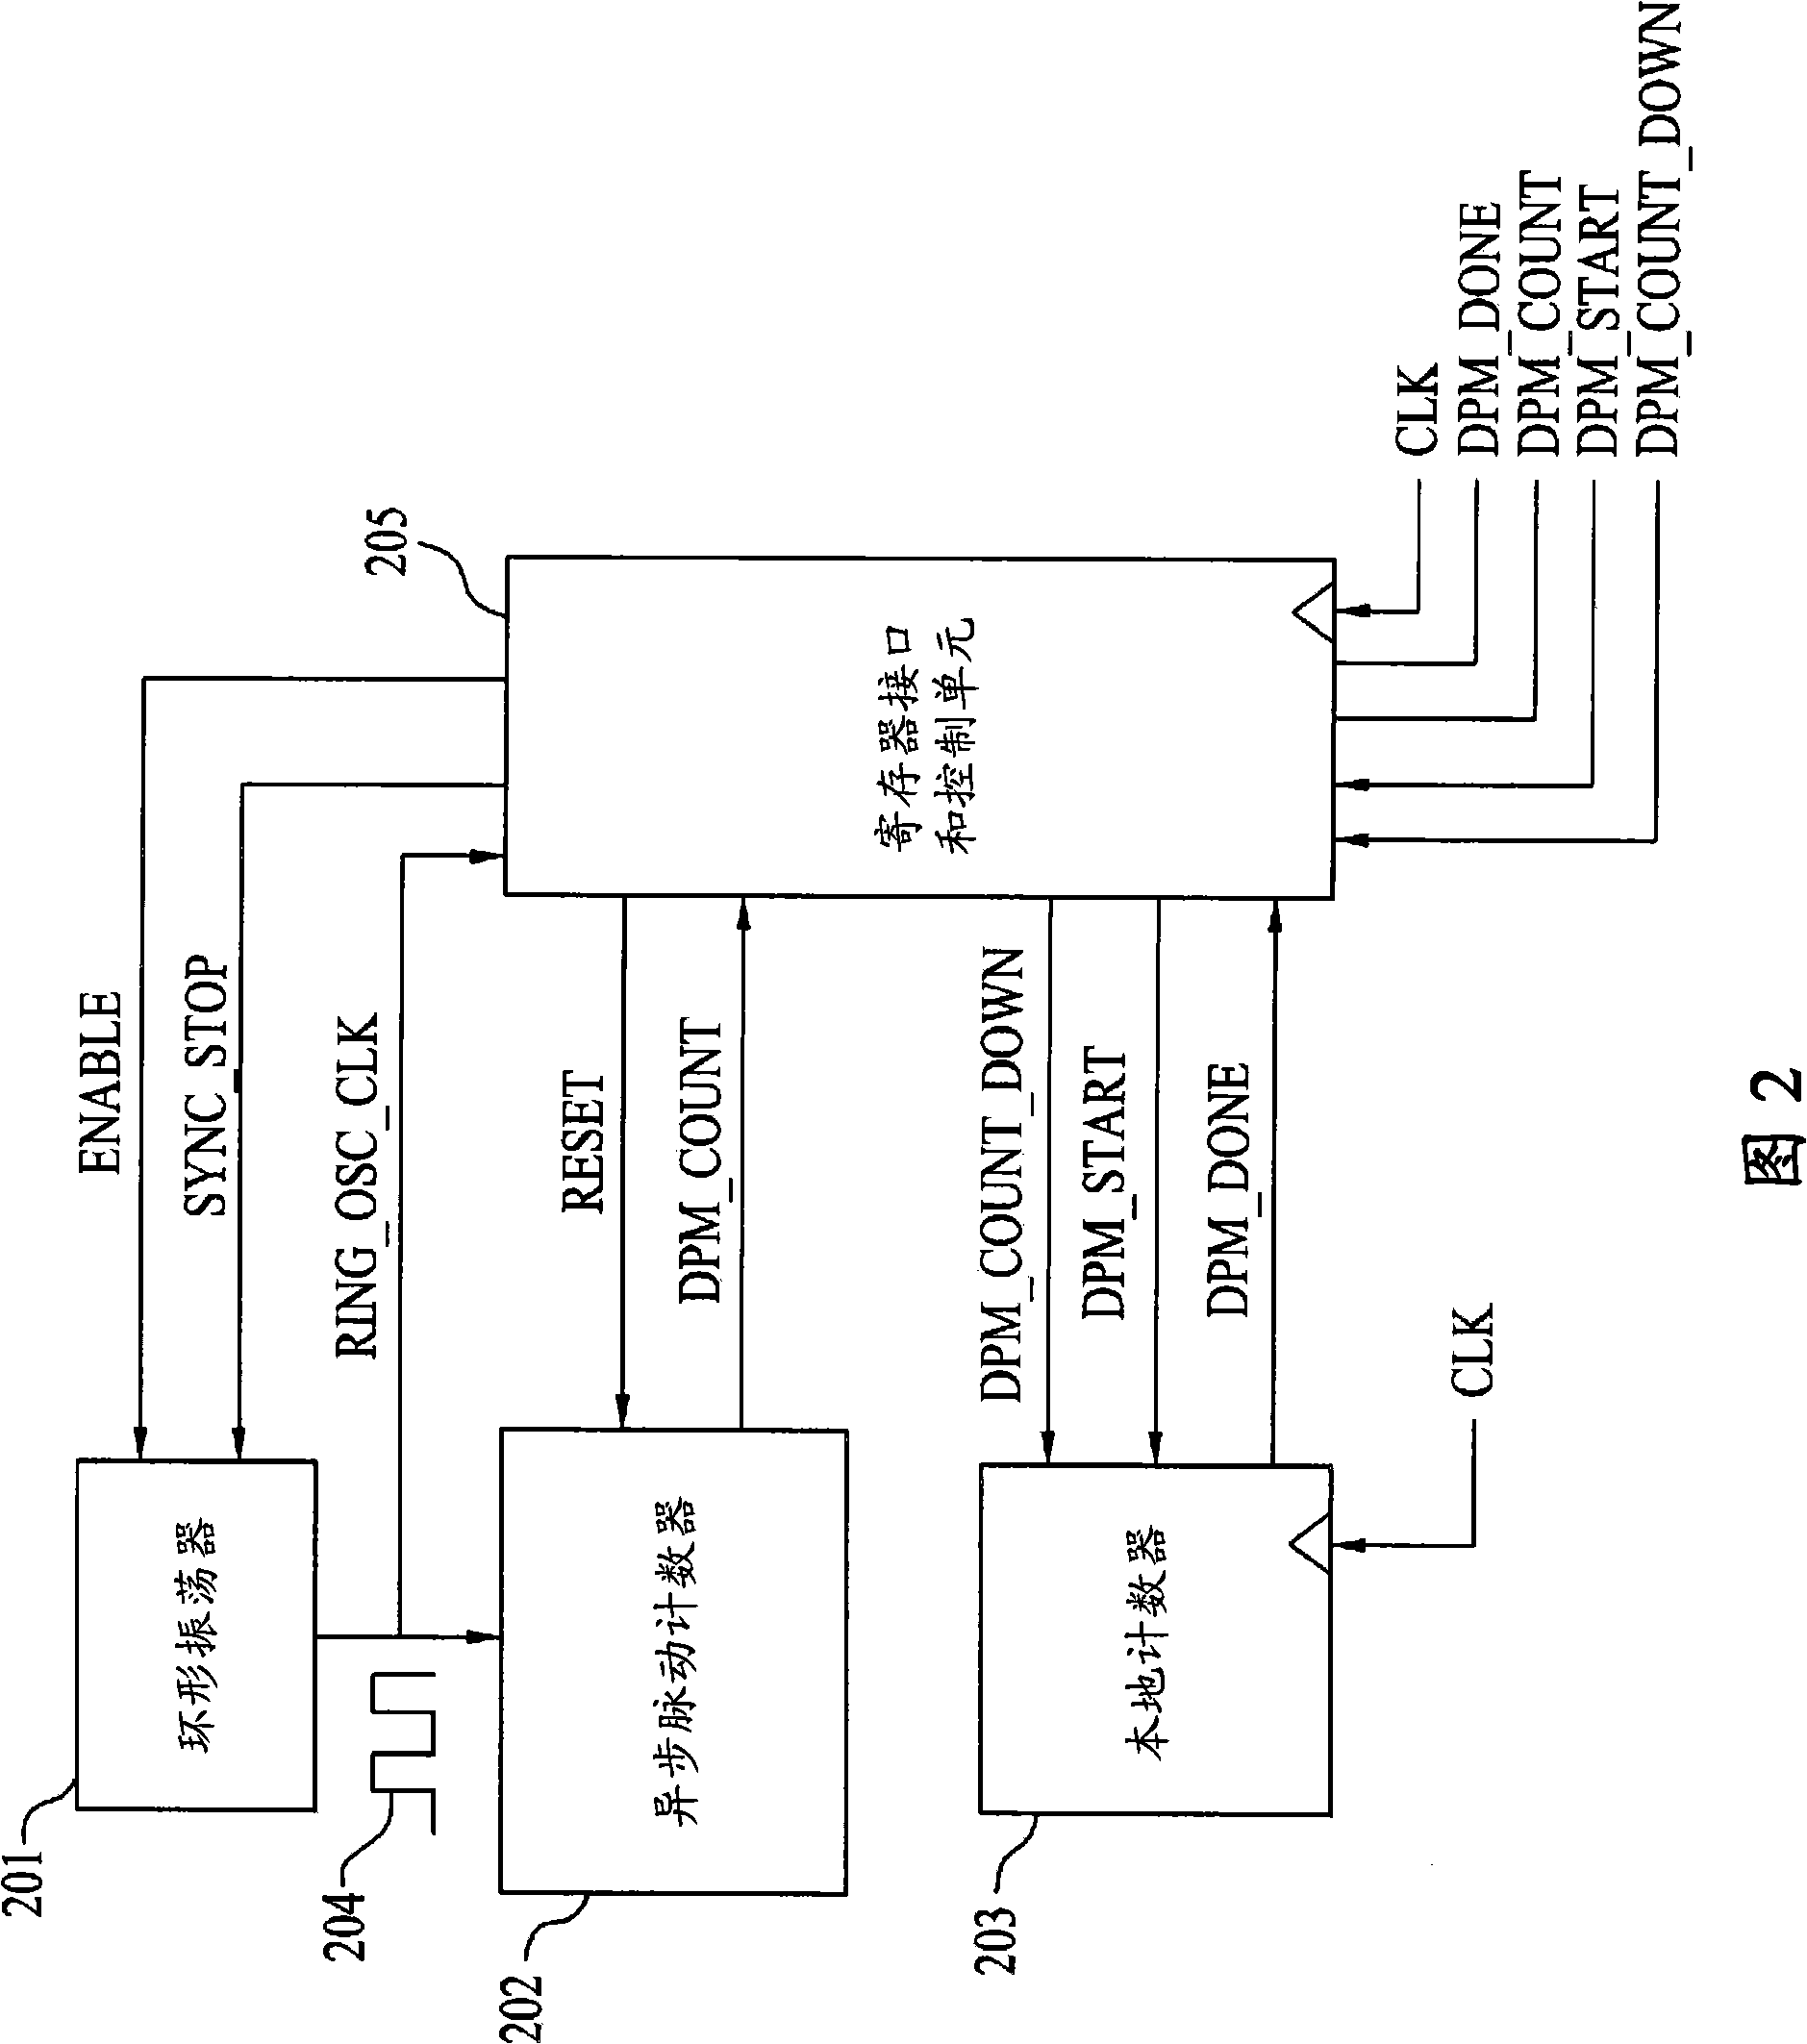 Measurement apparatus for improving performance of standard cell library